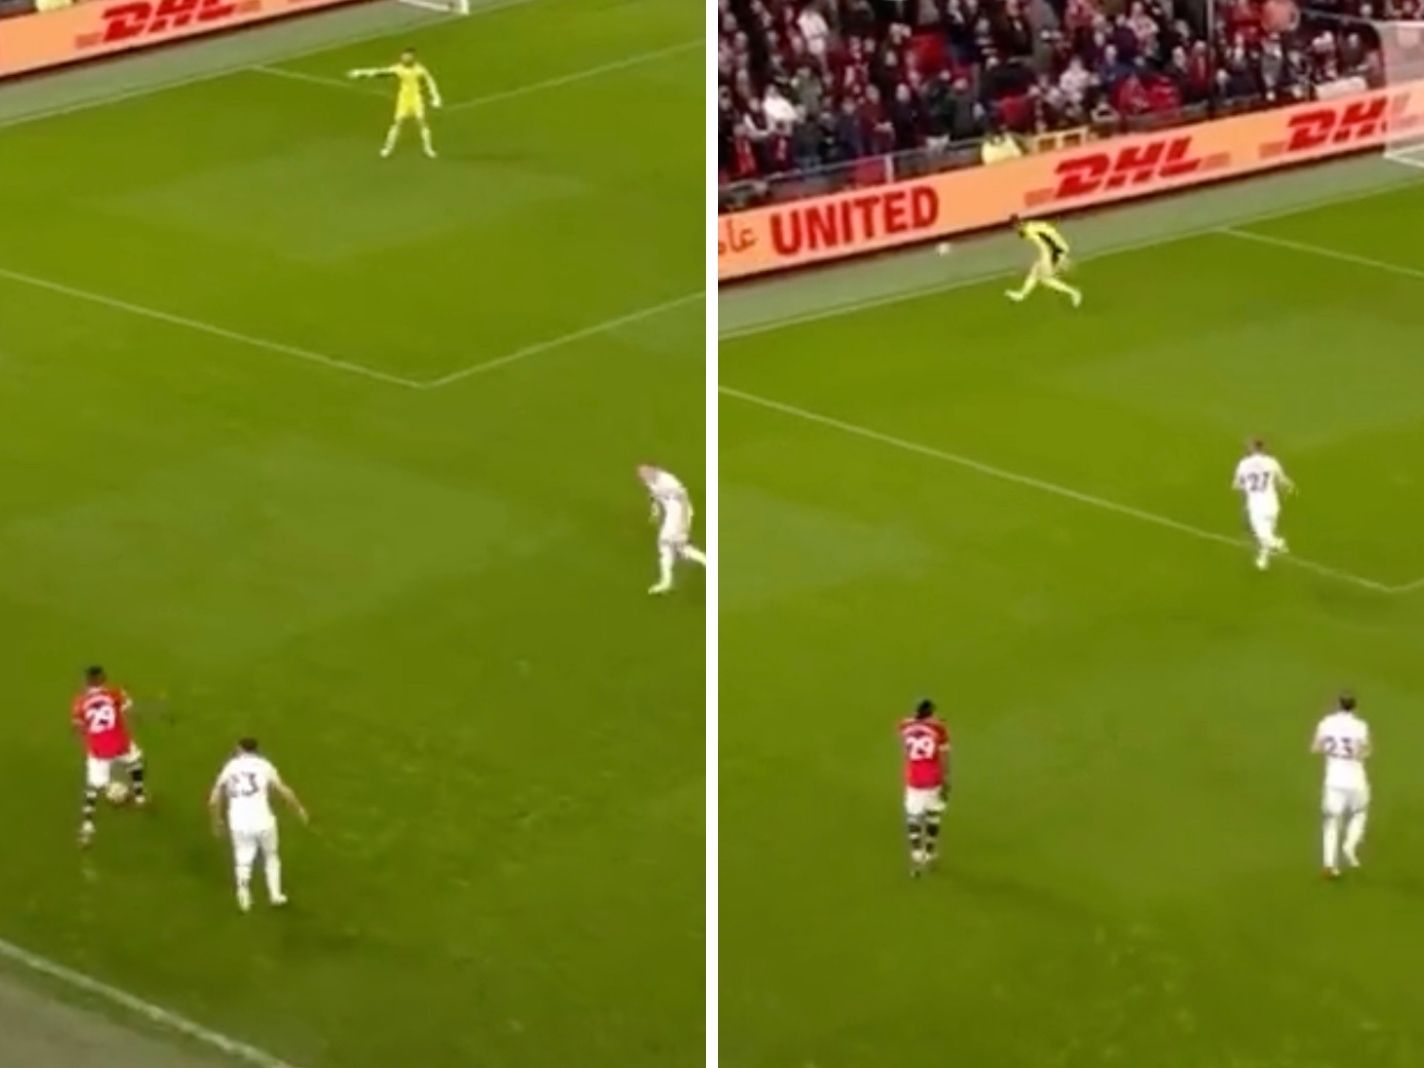 This Aaron Wan-Bissaka back pass against Burnley went horribly wrong